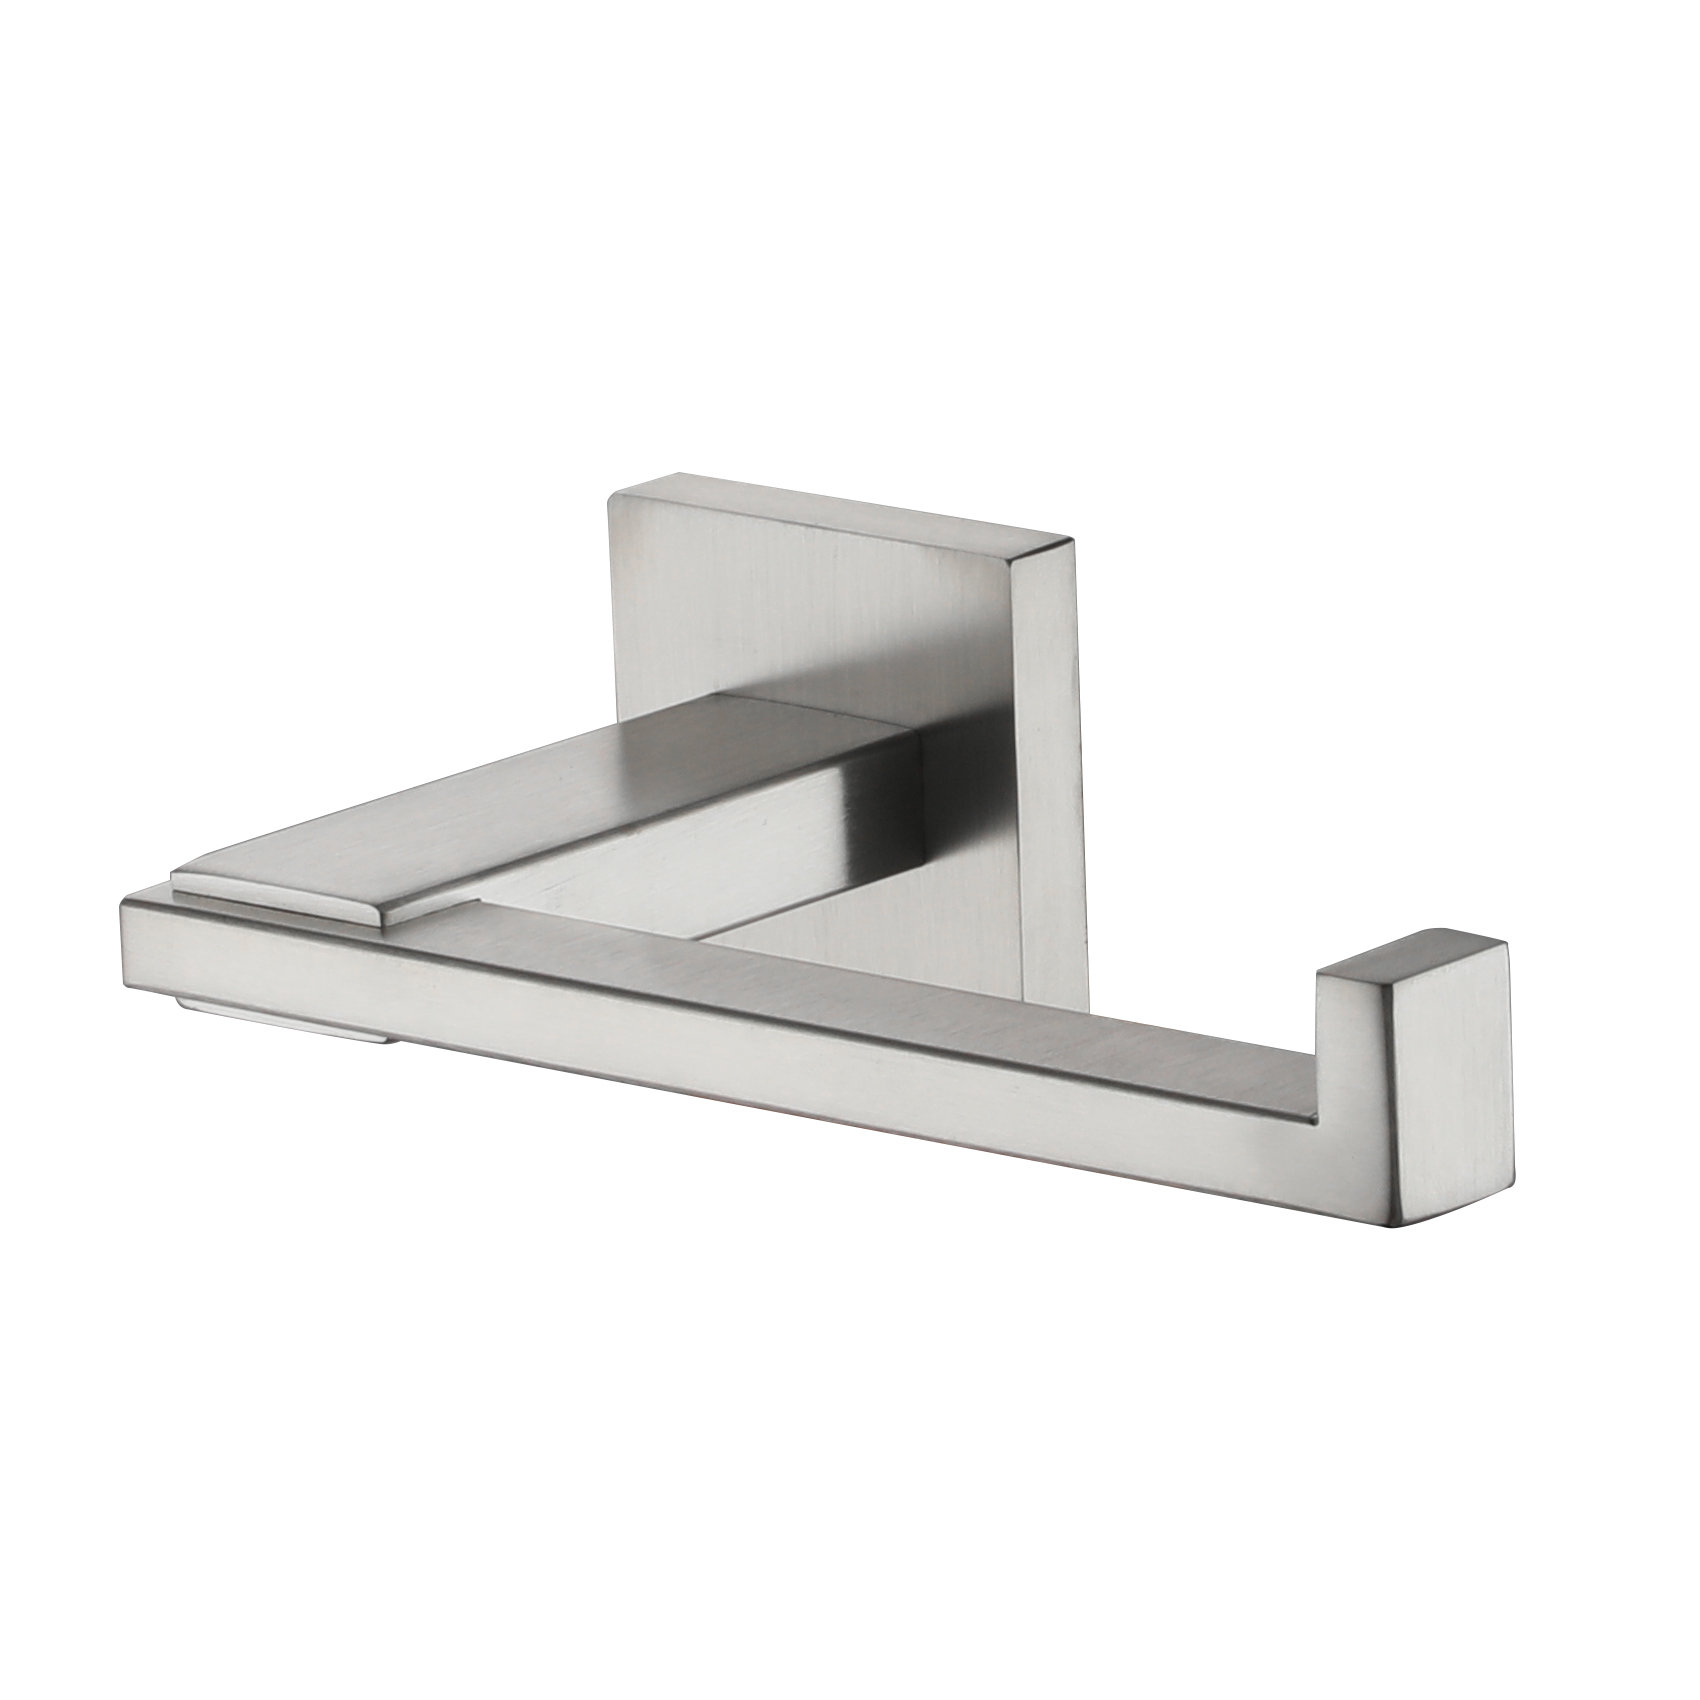 FORIOUS Recessed Toilet Paper Holder Brushed Nickel, Brushed Nickel Toilet  Paper Holder Wall Mount Includes Rear Mounting Bracket, Stainless Steel